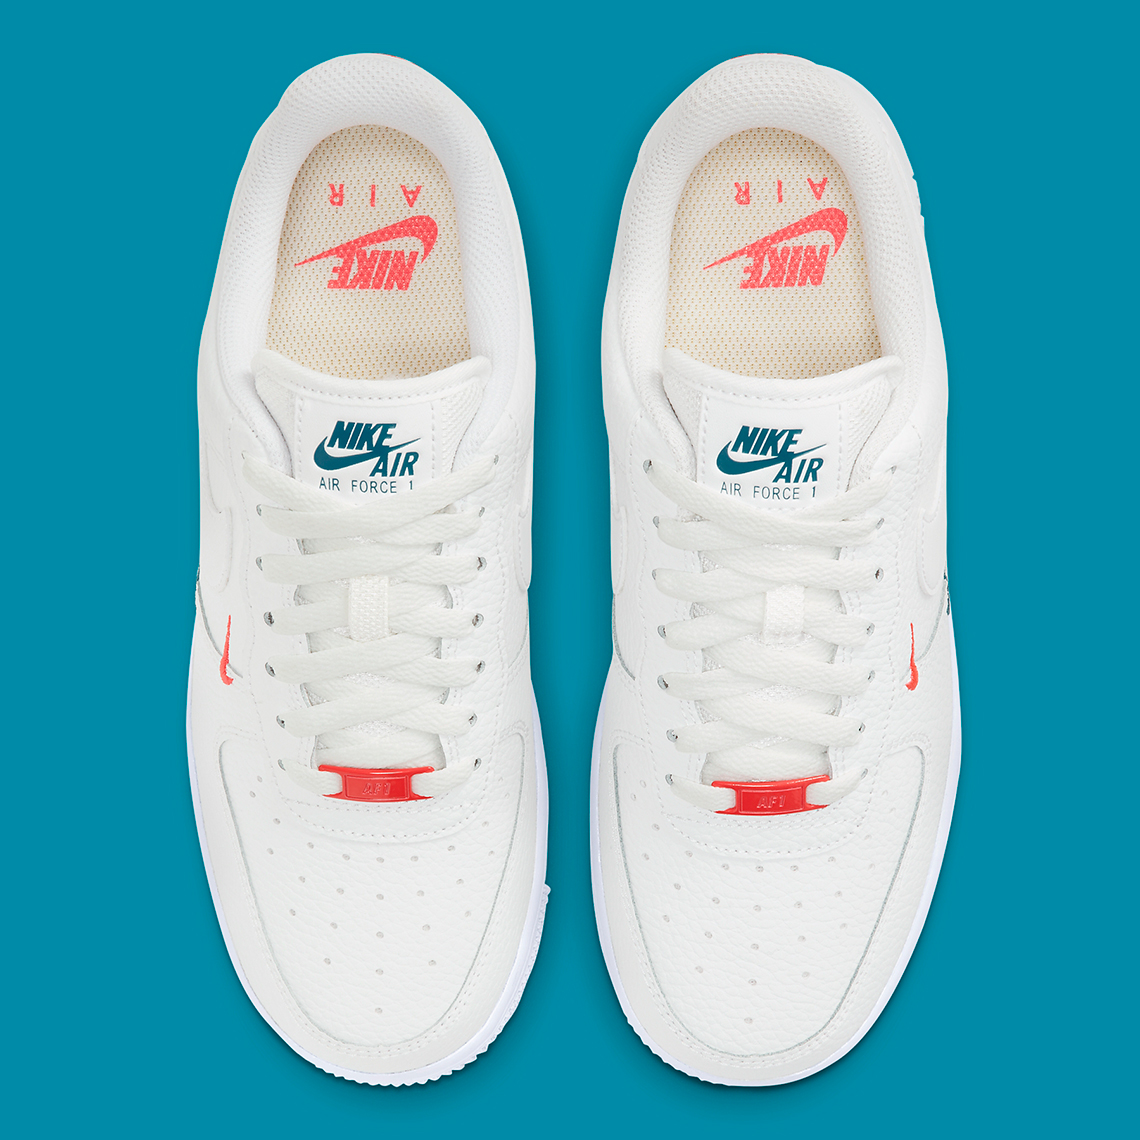 Nike WMNS Air Force 1 Low '07 Mini Swooshes - Summit White / Solar Red -  Stadium Goods